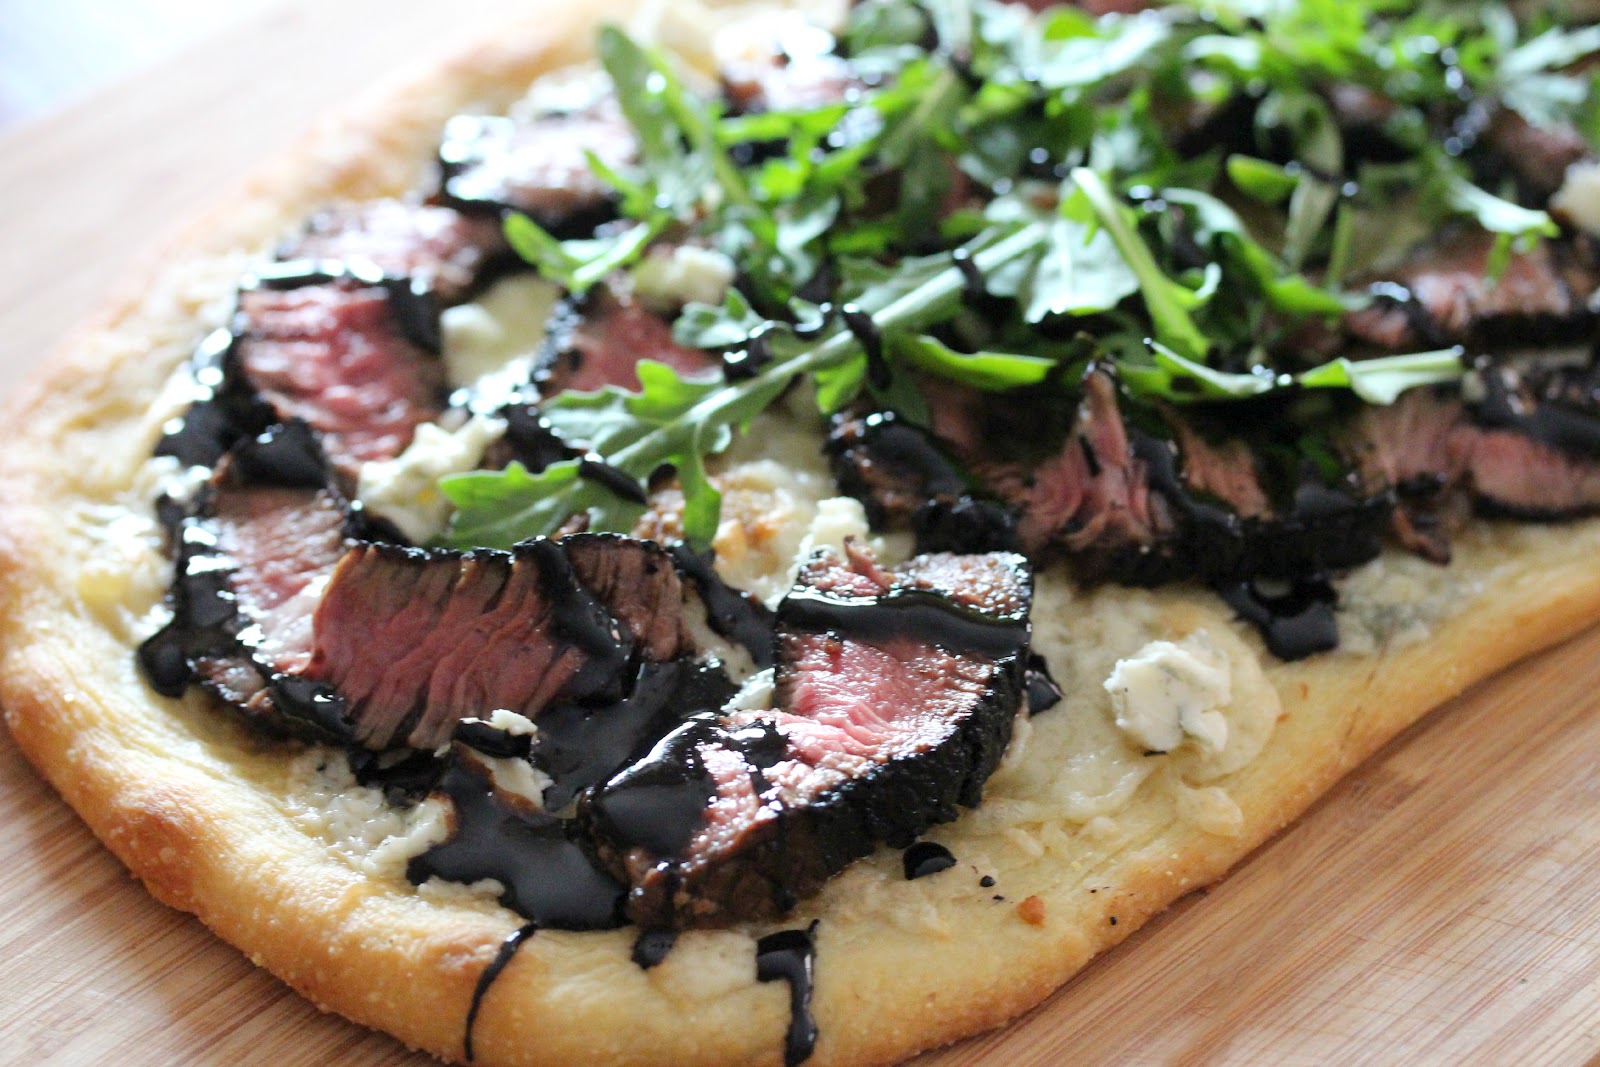 Balsamic Reduction Recipe For Pizza